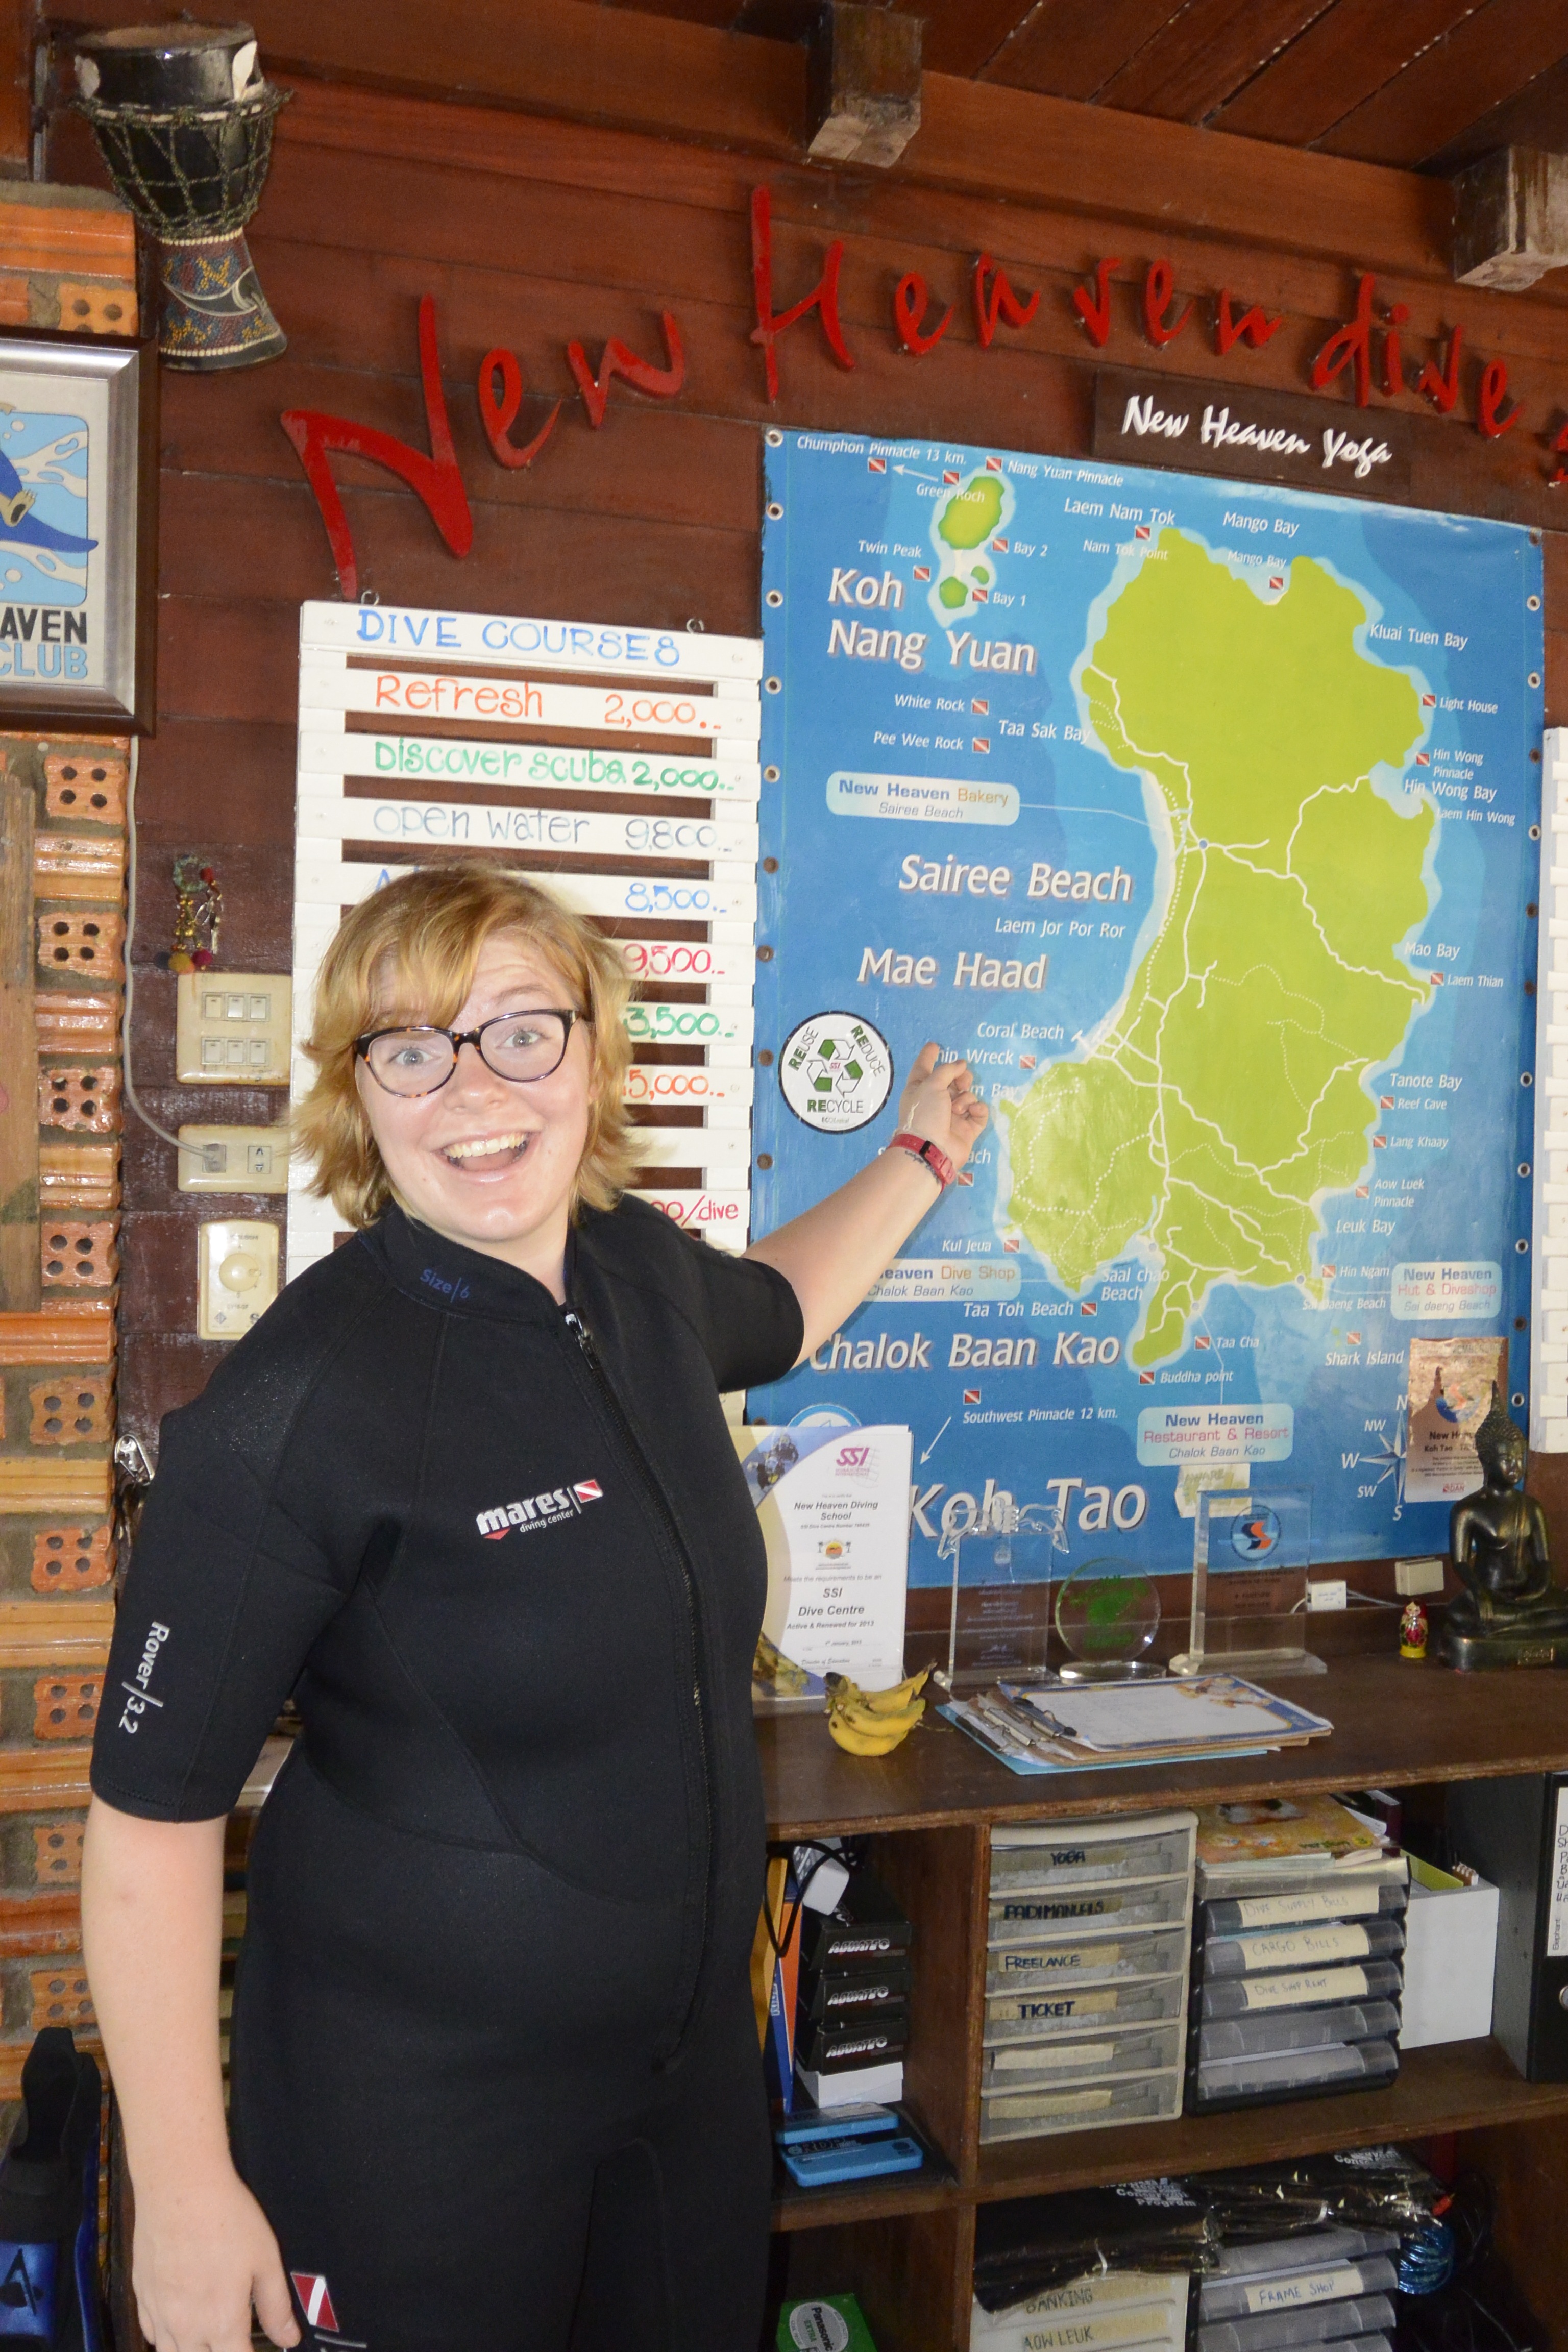 That's a map of Koh Tao and me in my wetsuit. We were actually in Chalok Baan Kao on the south end of the island.